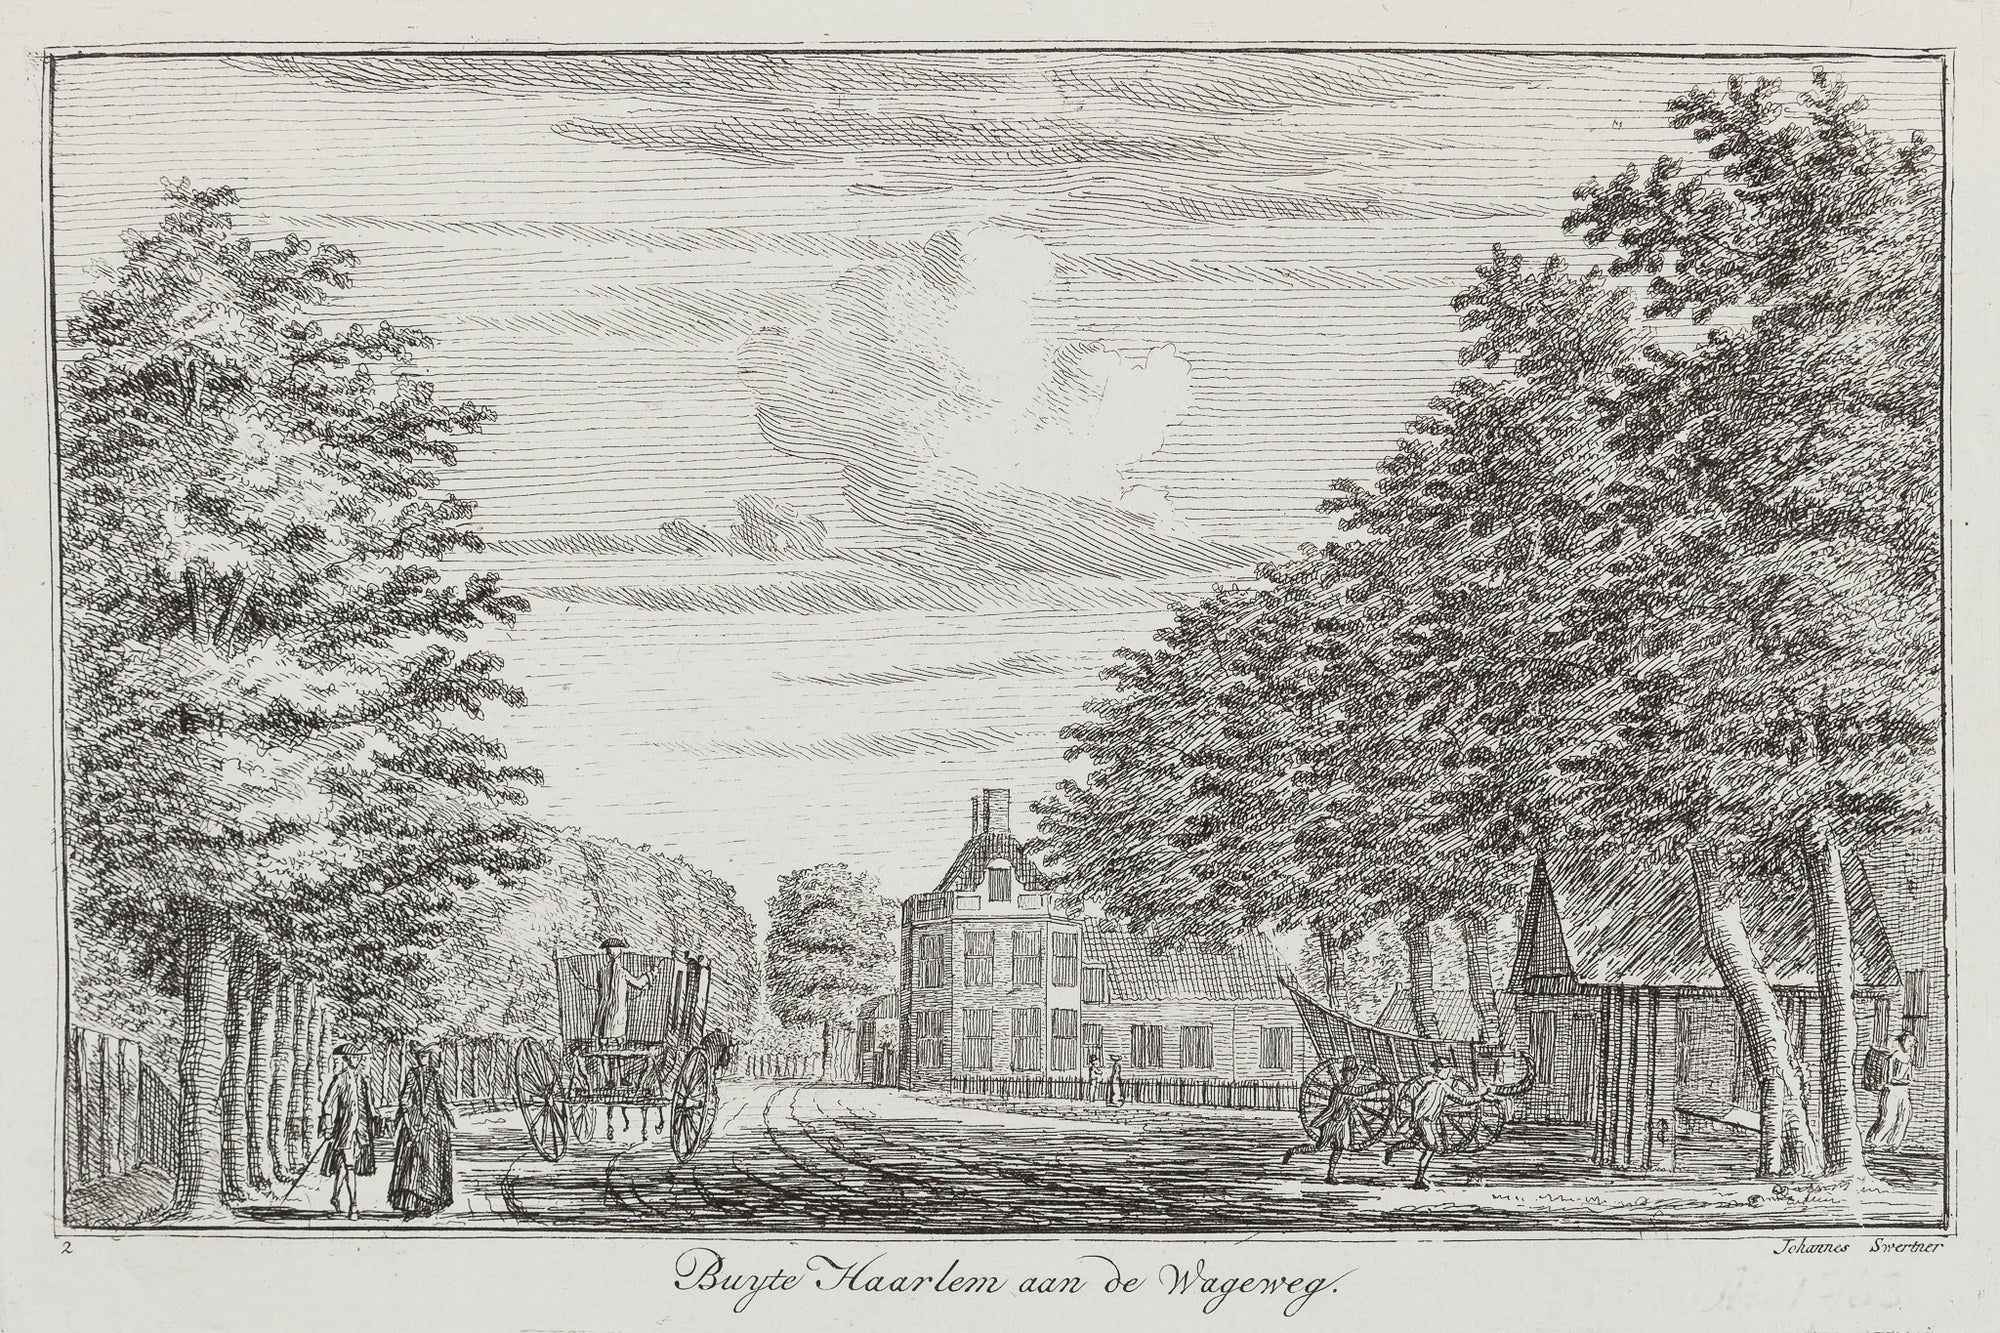 Antieke prent. Antique print. Title: 'Buyte Haarlem aan de Wagenweg' Etching by Johannes Swertner from a series published in 1763. Nice rare view at the mansion Bosch en Vaart.